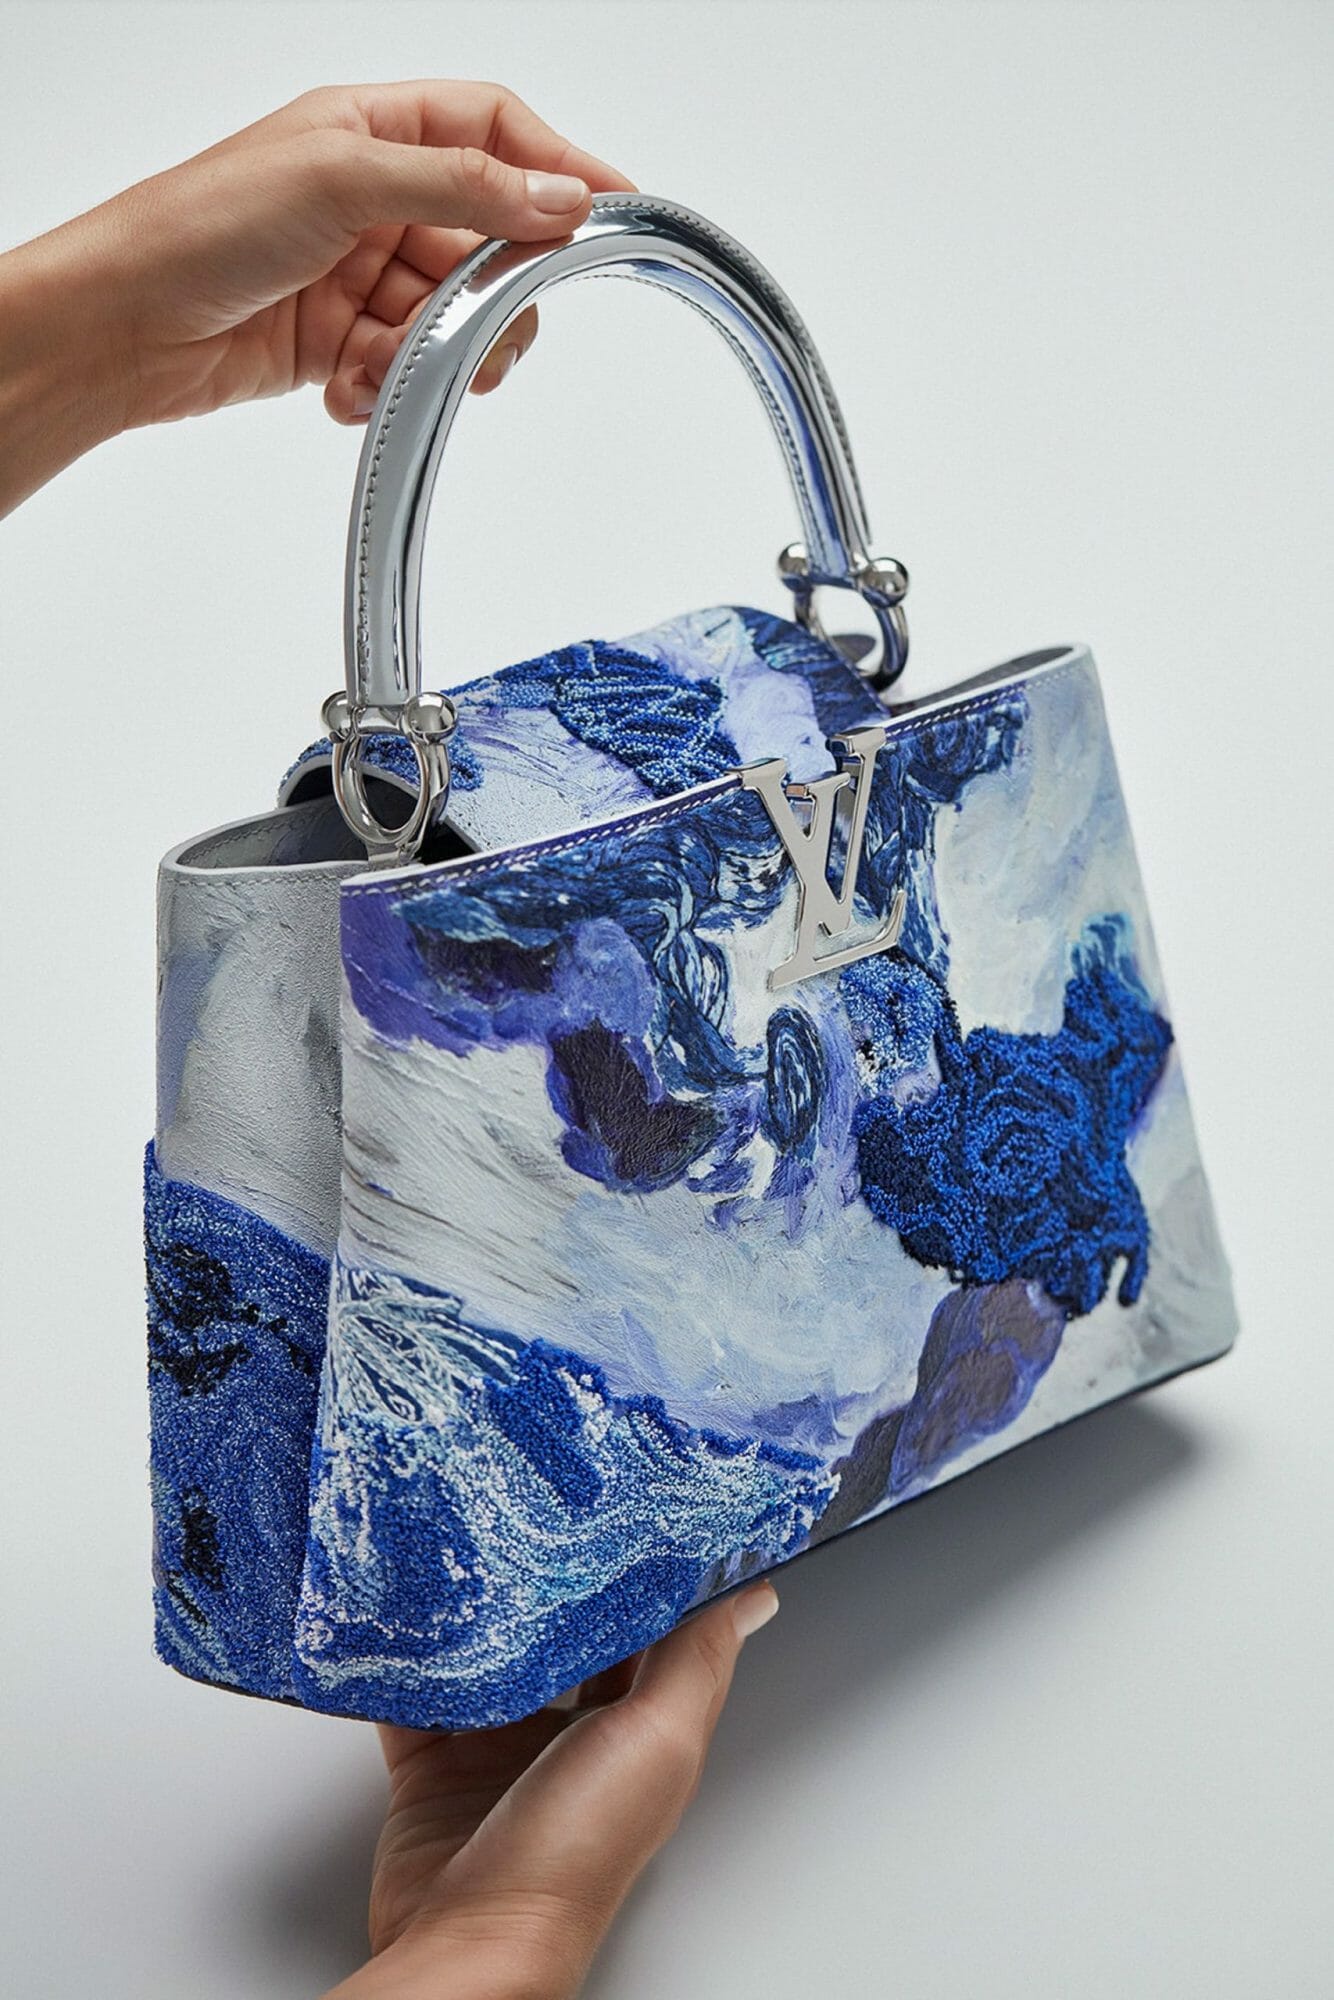 Meet The Artists Entering The Fray For Louis Vuitton's Artycapucines